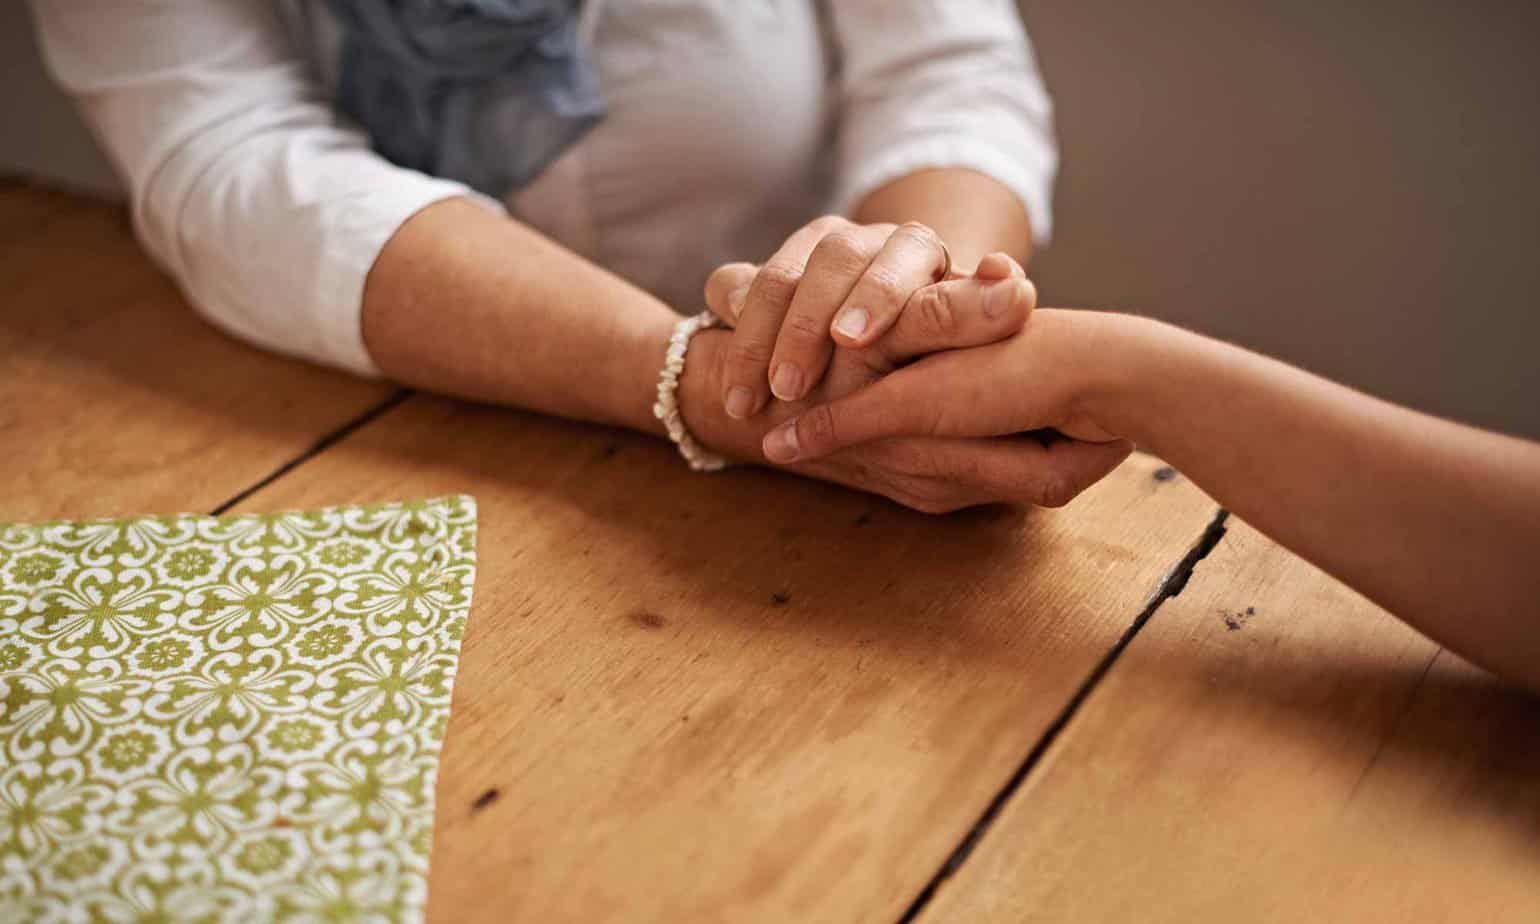 Quiz: Do You Know How to Best Help Your Loved One’s Recovery?